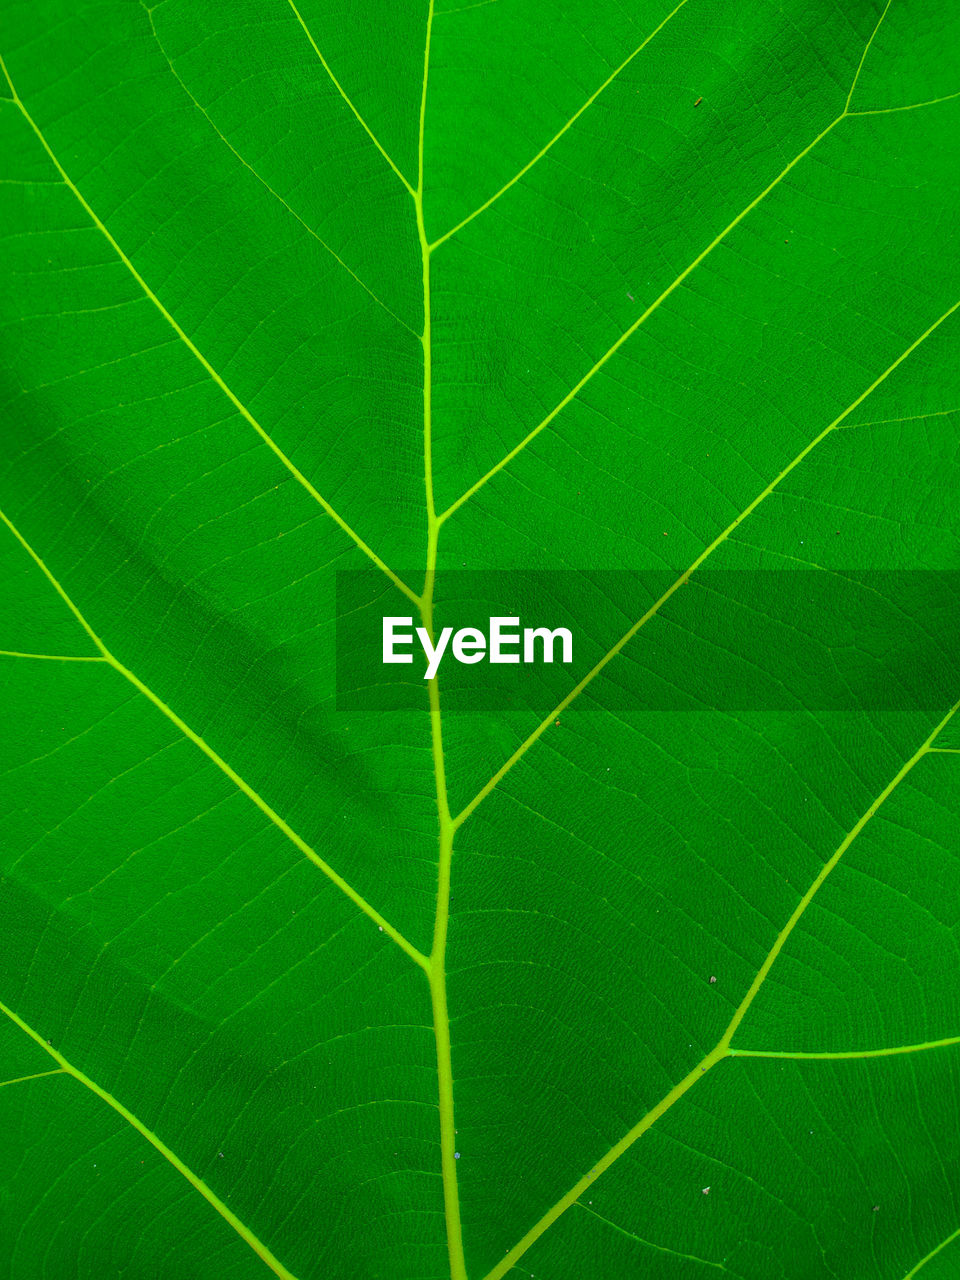 Leaf is evergreen